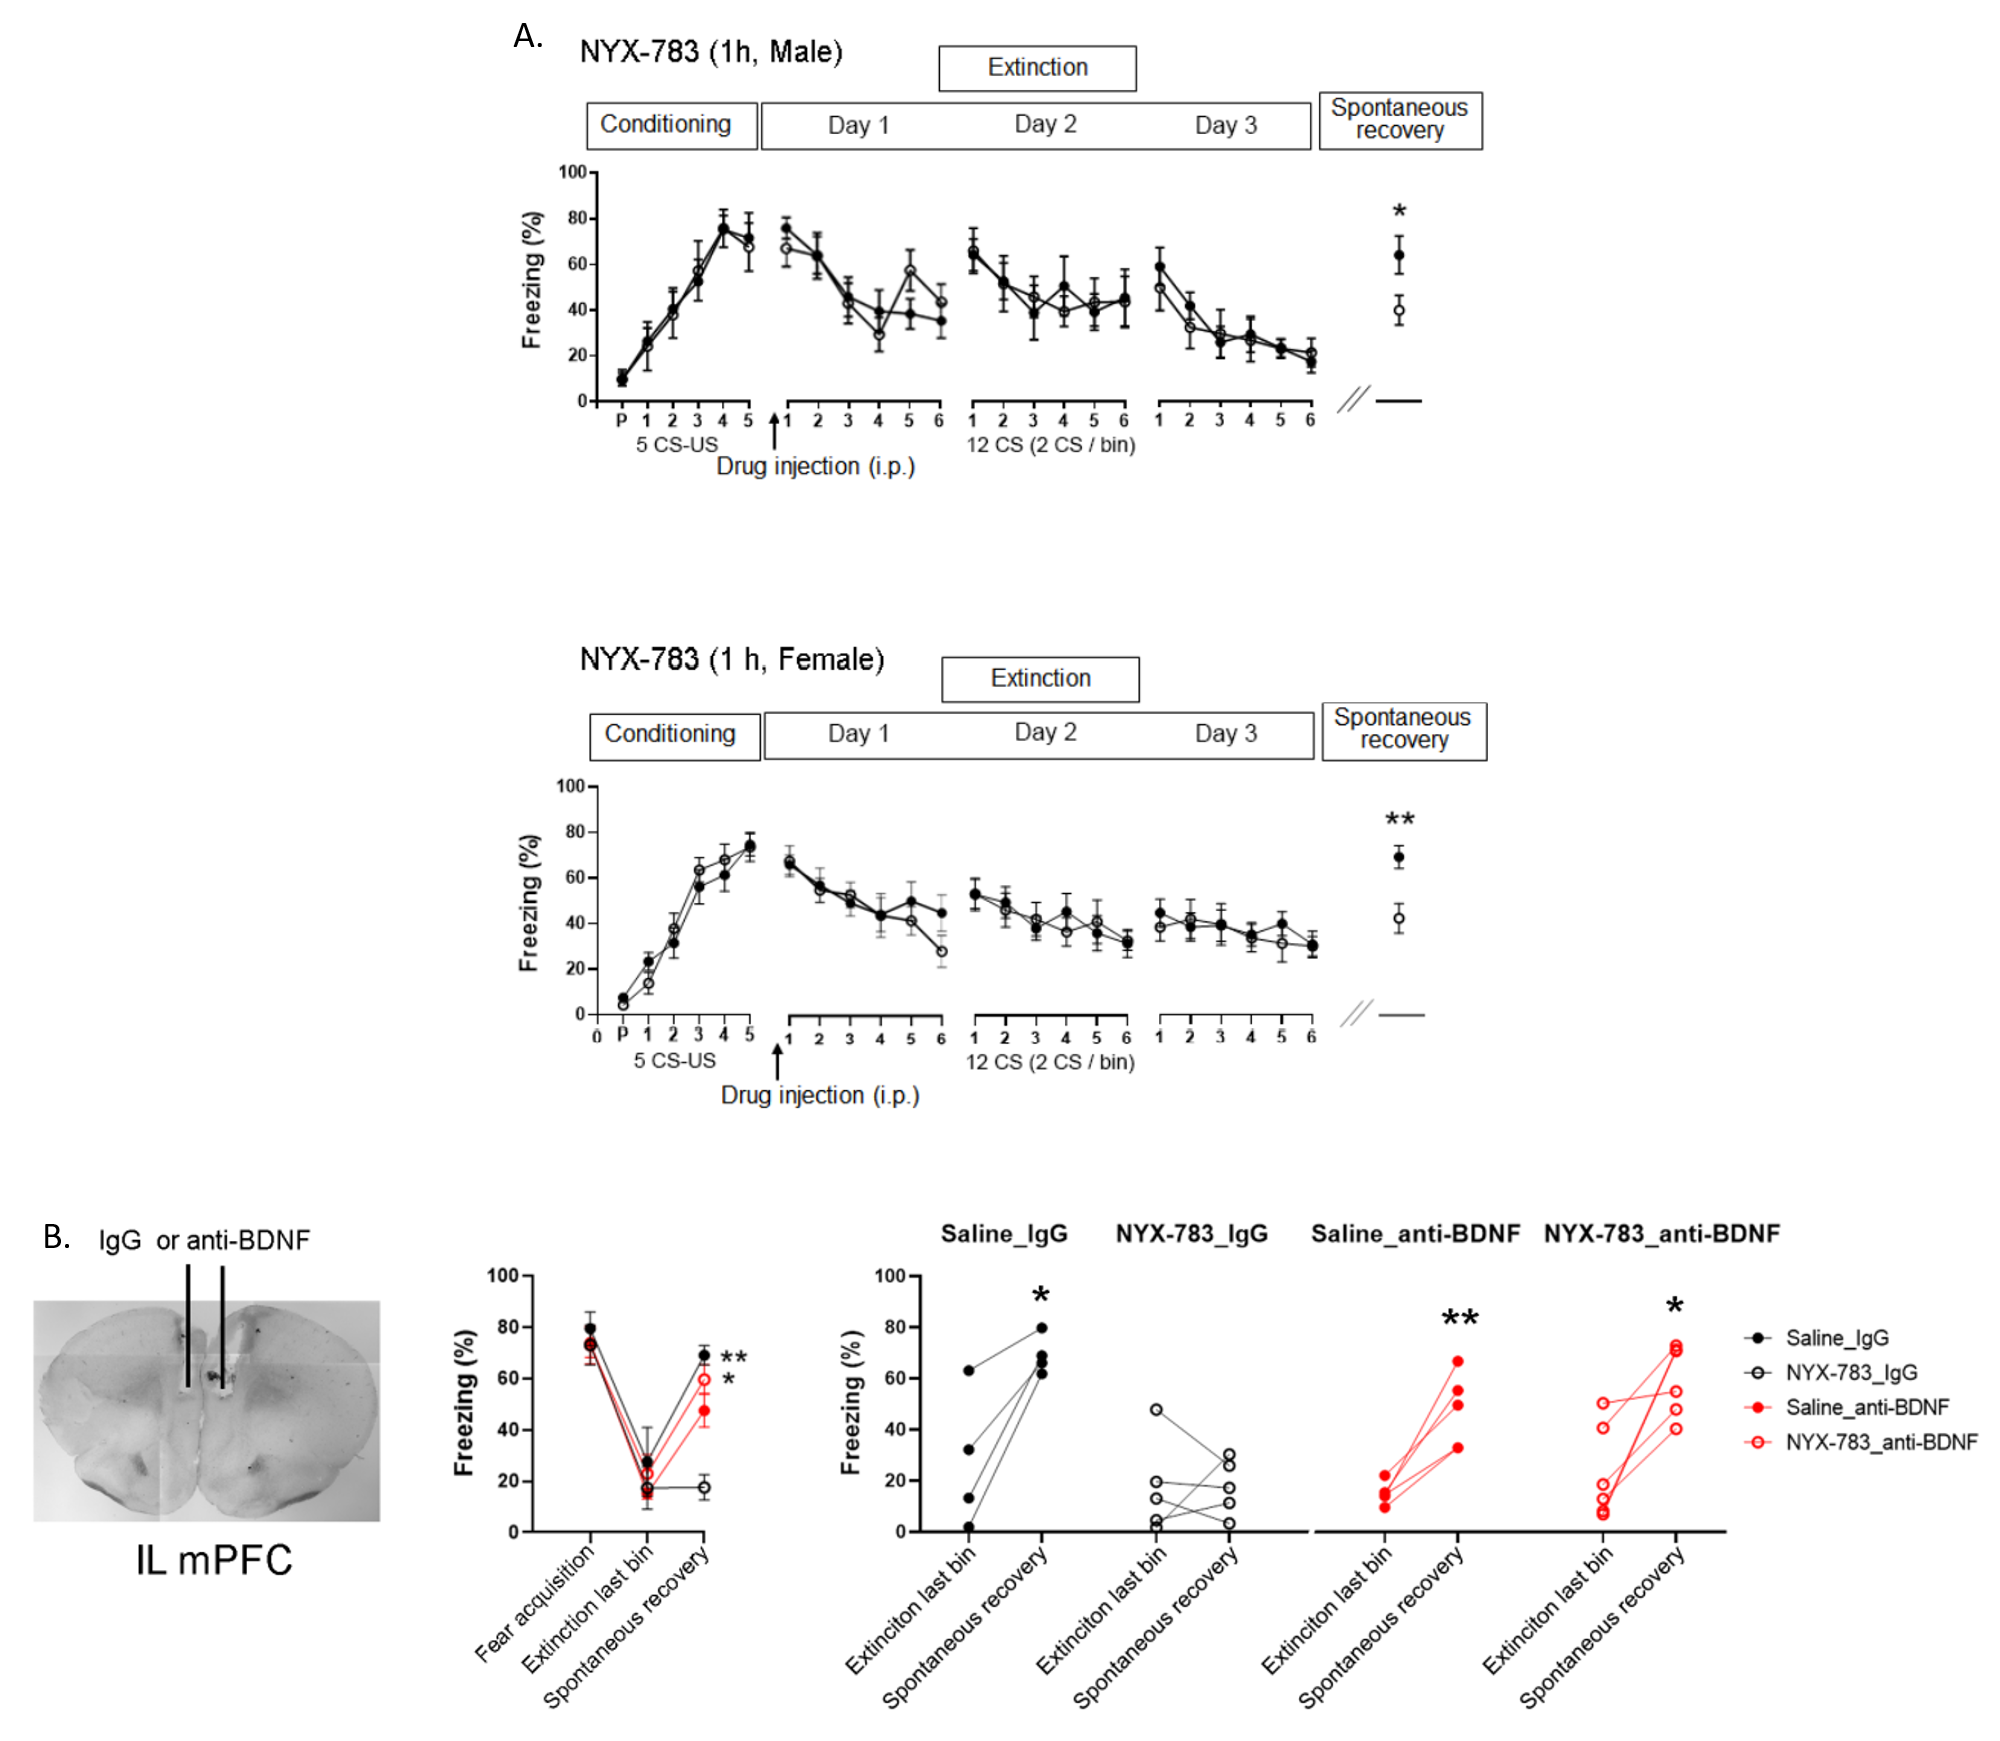 Figure 2. Experimental data of this study. A) Injection of NYX-783 before the extinction therapy resulted in the successful extinction of PTSD memories and prevented spontaneous recovery. The drug treatment was more effective in female mice, suggesting differential sensitivity of NMDAR modulators in males and females. B) When the activity of endogenous BDNF was blocked in the mouse brain using an antibody, the PTSD memory underwent spontaneous recovery even after successful extinction. When the activity of endogenous BDNF was blocked, NYX-783 injected mice fared no better than those injected with saline.